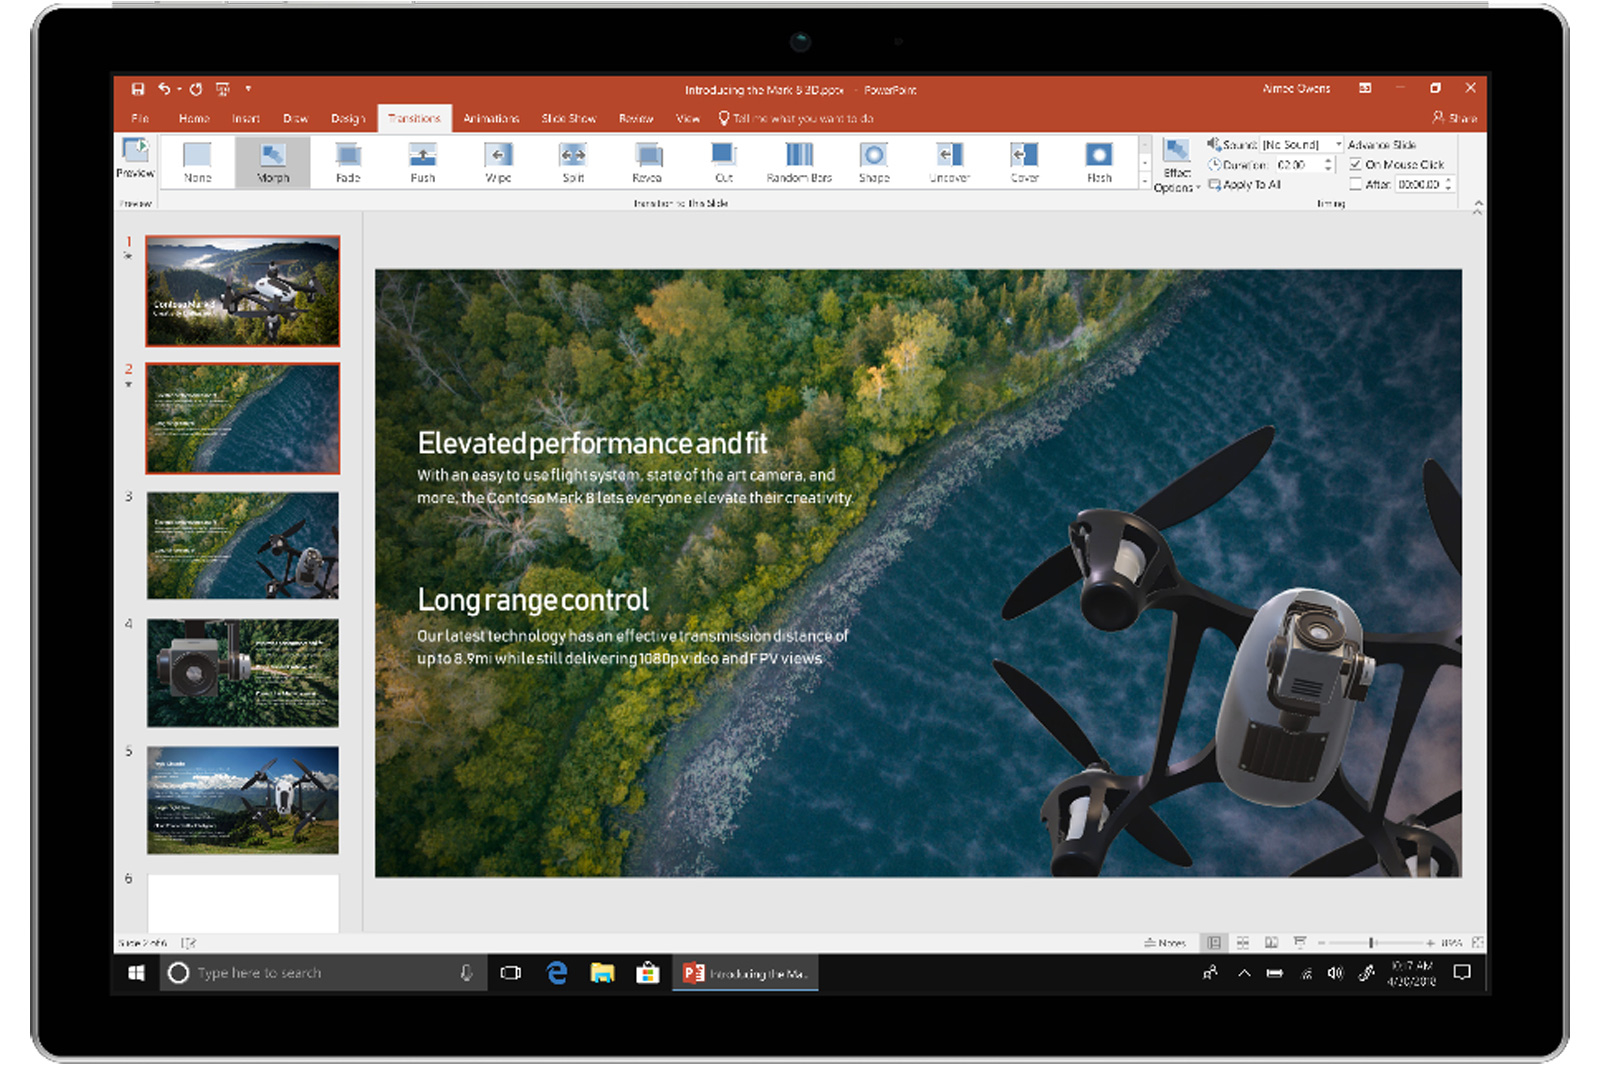 ms word for mac free download full version